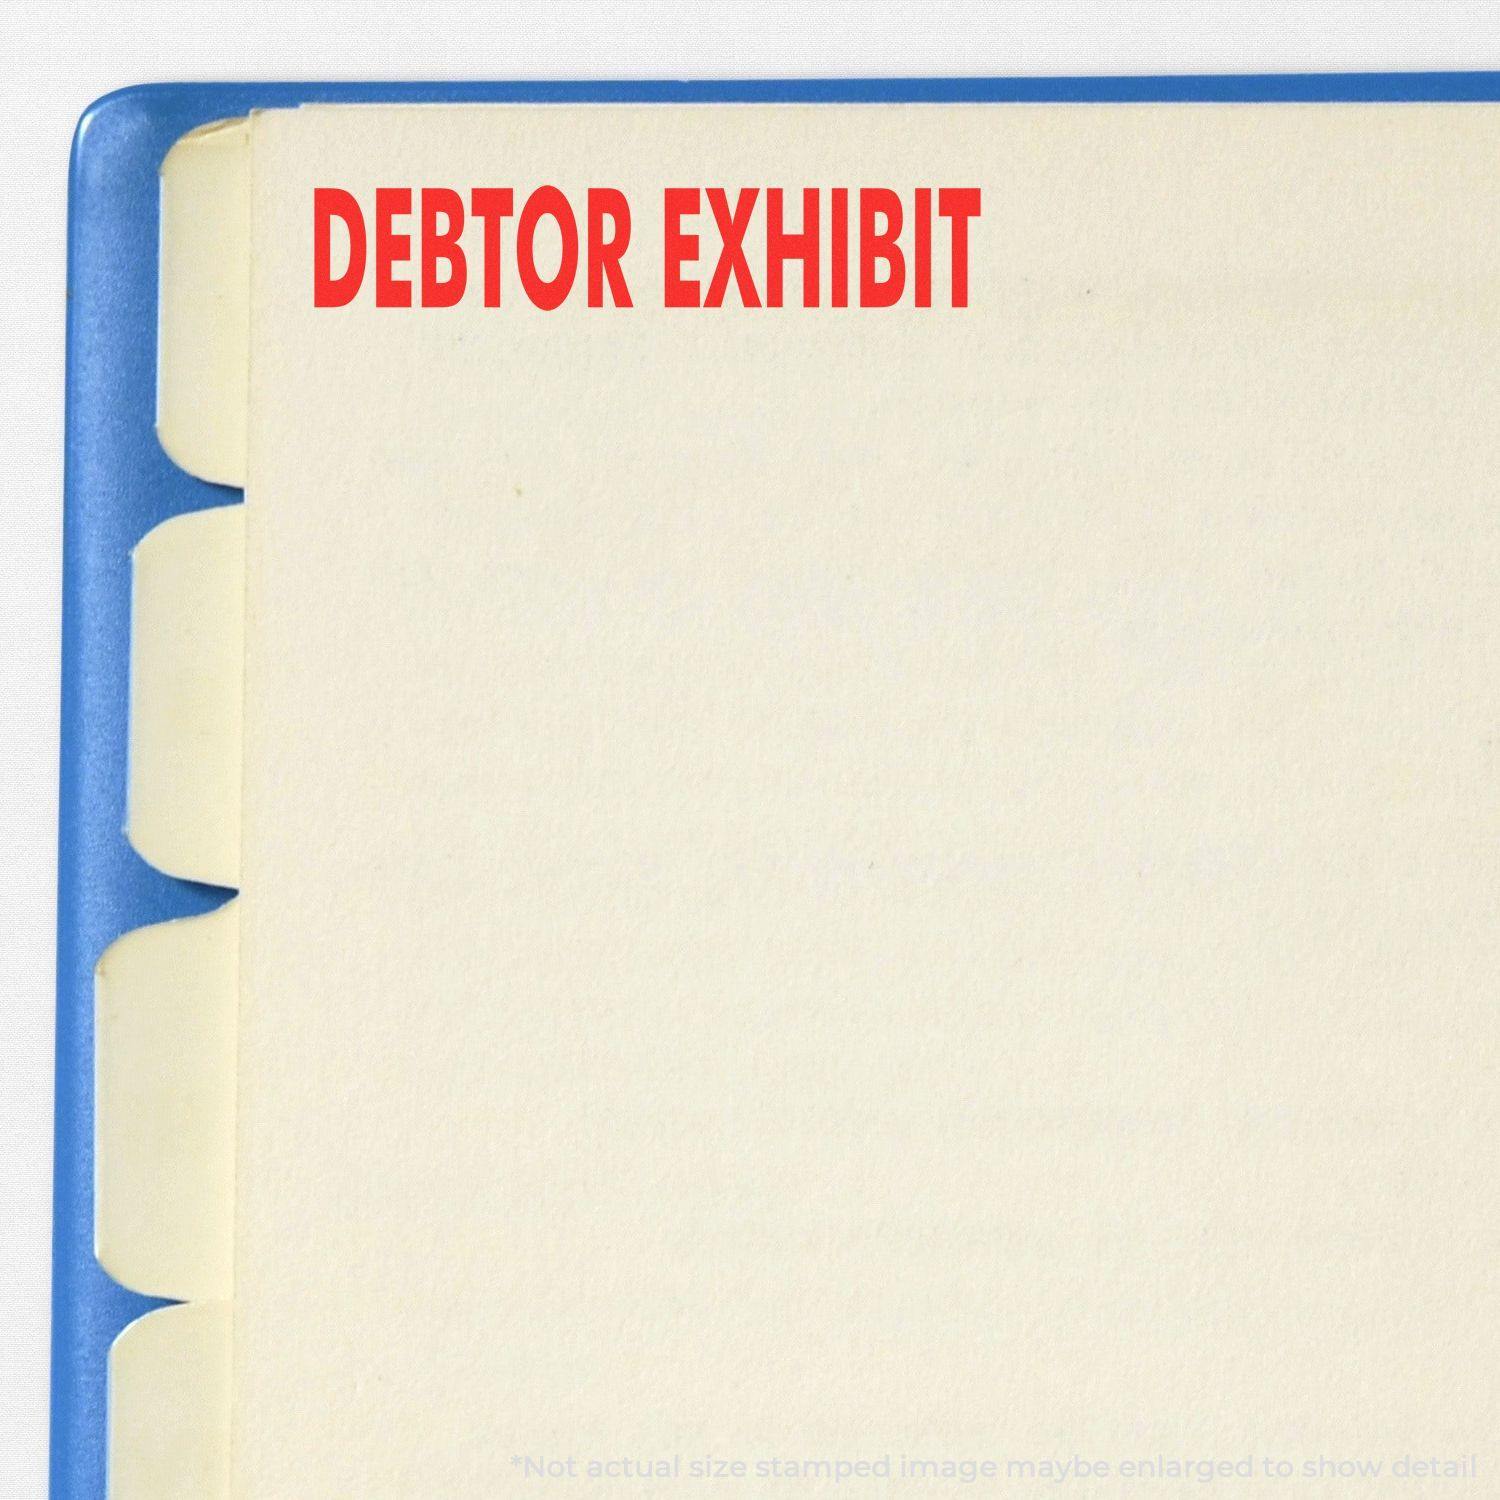 A self-inking stamp with a stamped image showing how the text "DEBTOR EXHIBIT" is displayed after stamping.